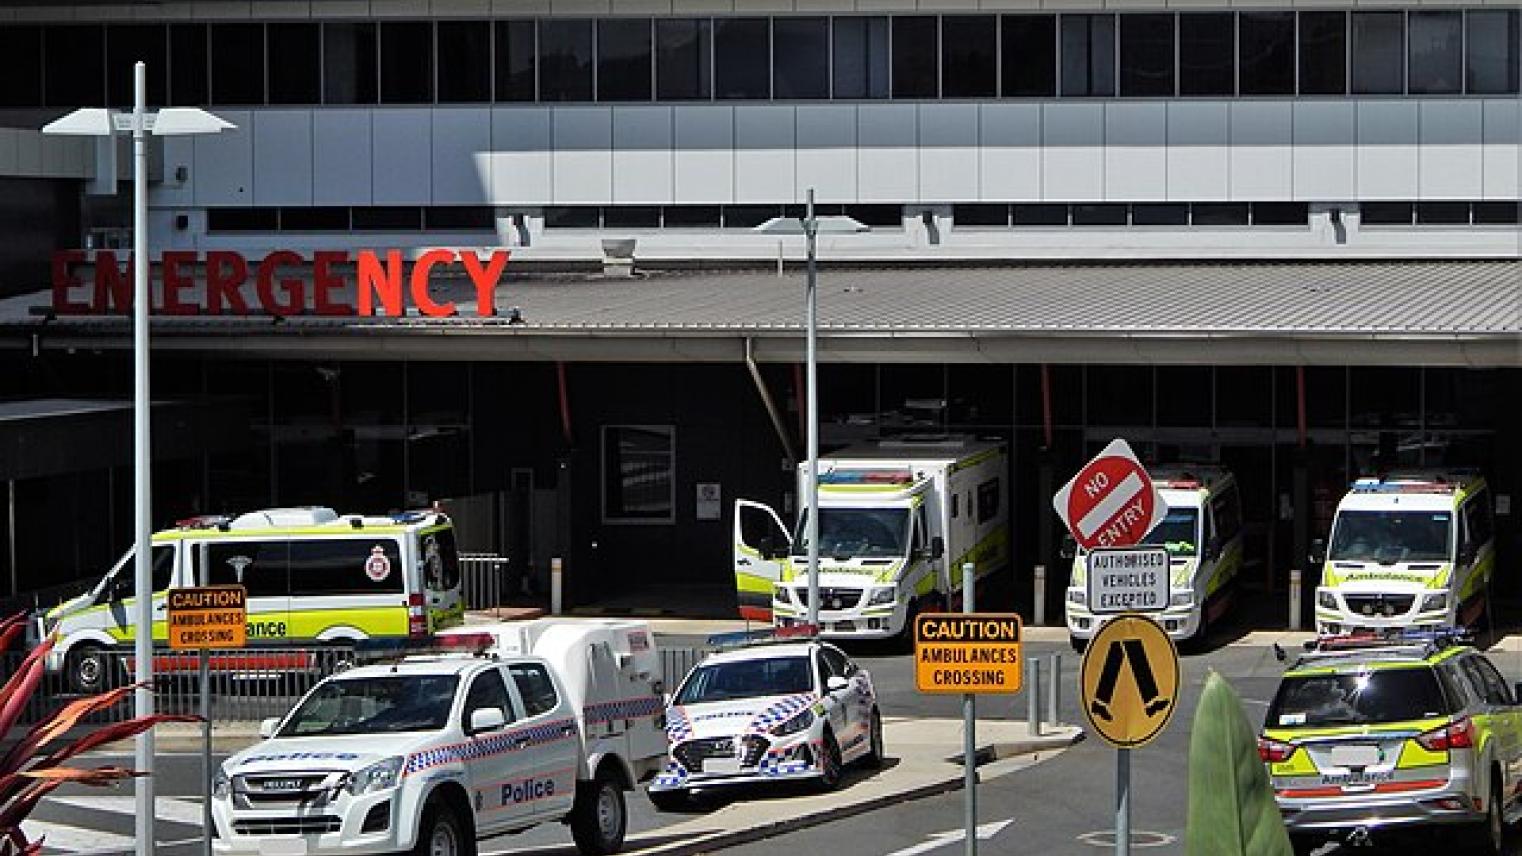 Image of emergency service vehicles at Rockhampton Hospital, Queensland, by RegionalQueenslander from Wikipedia Commons https://commons.wikimedia.org/wiki/File:Emergency_Service_vehicles_at_Rockhampton_Hospital.jpg , free to use under CC BY-SA 4.0 licence